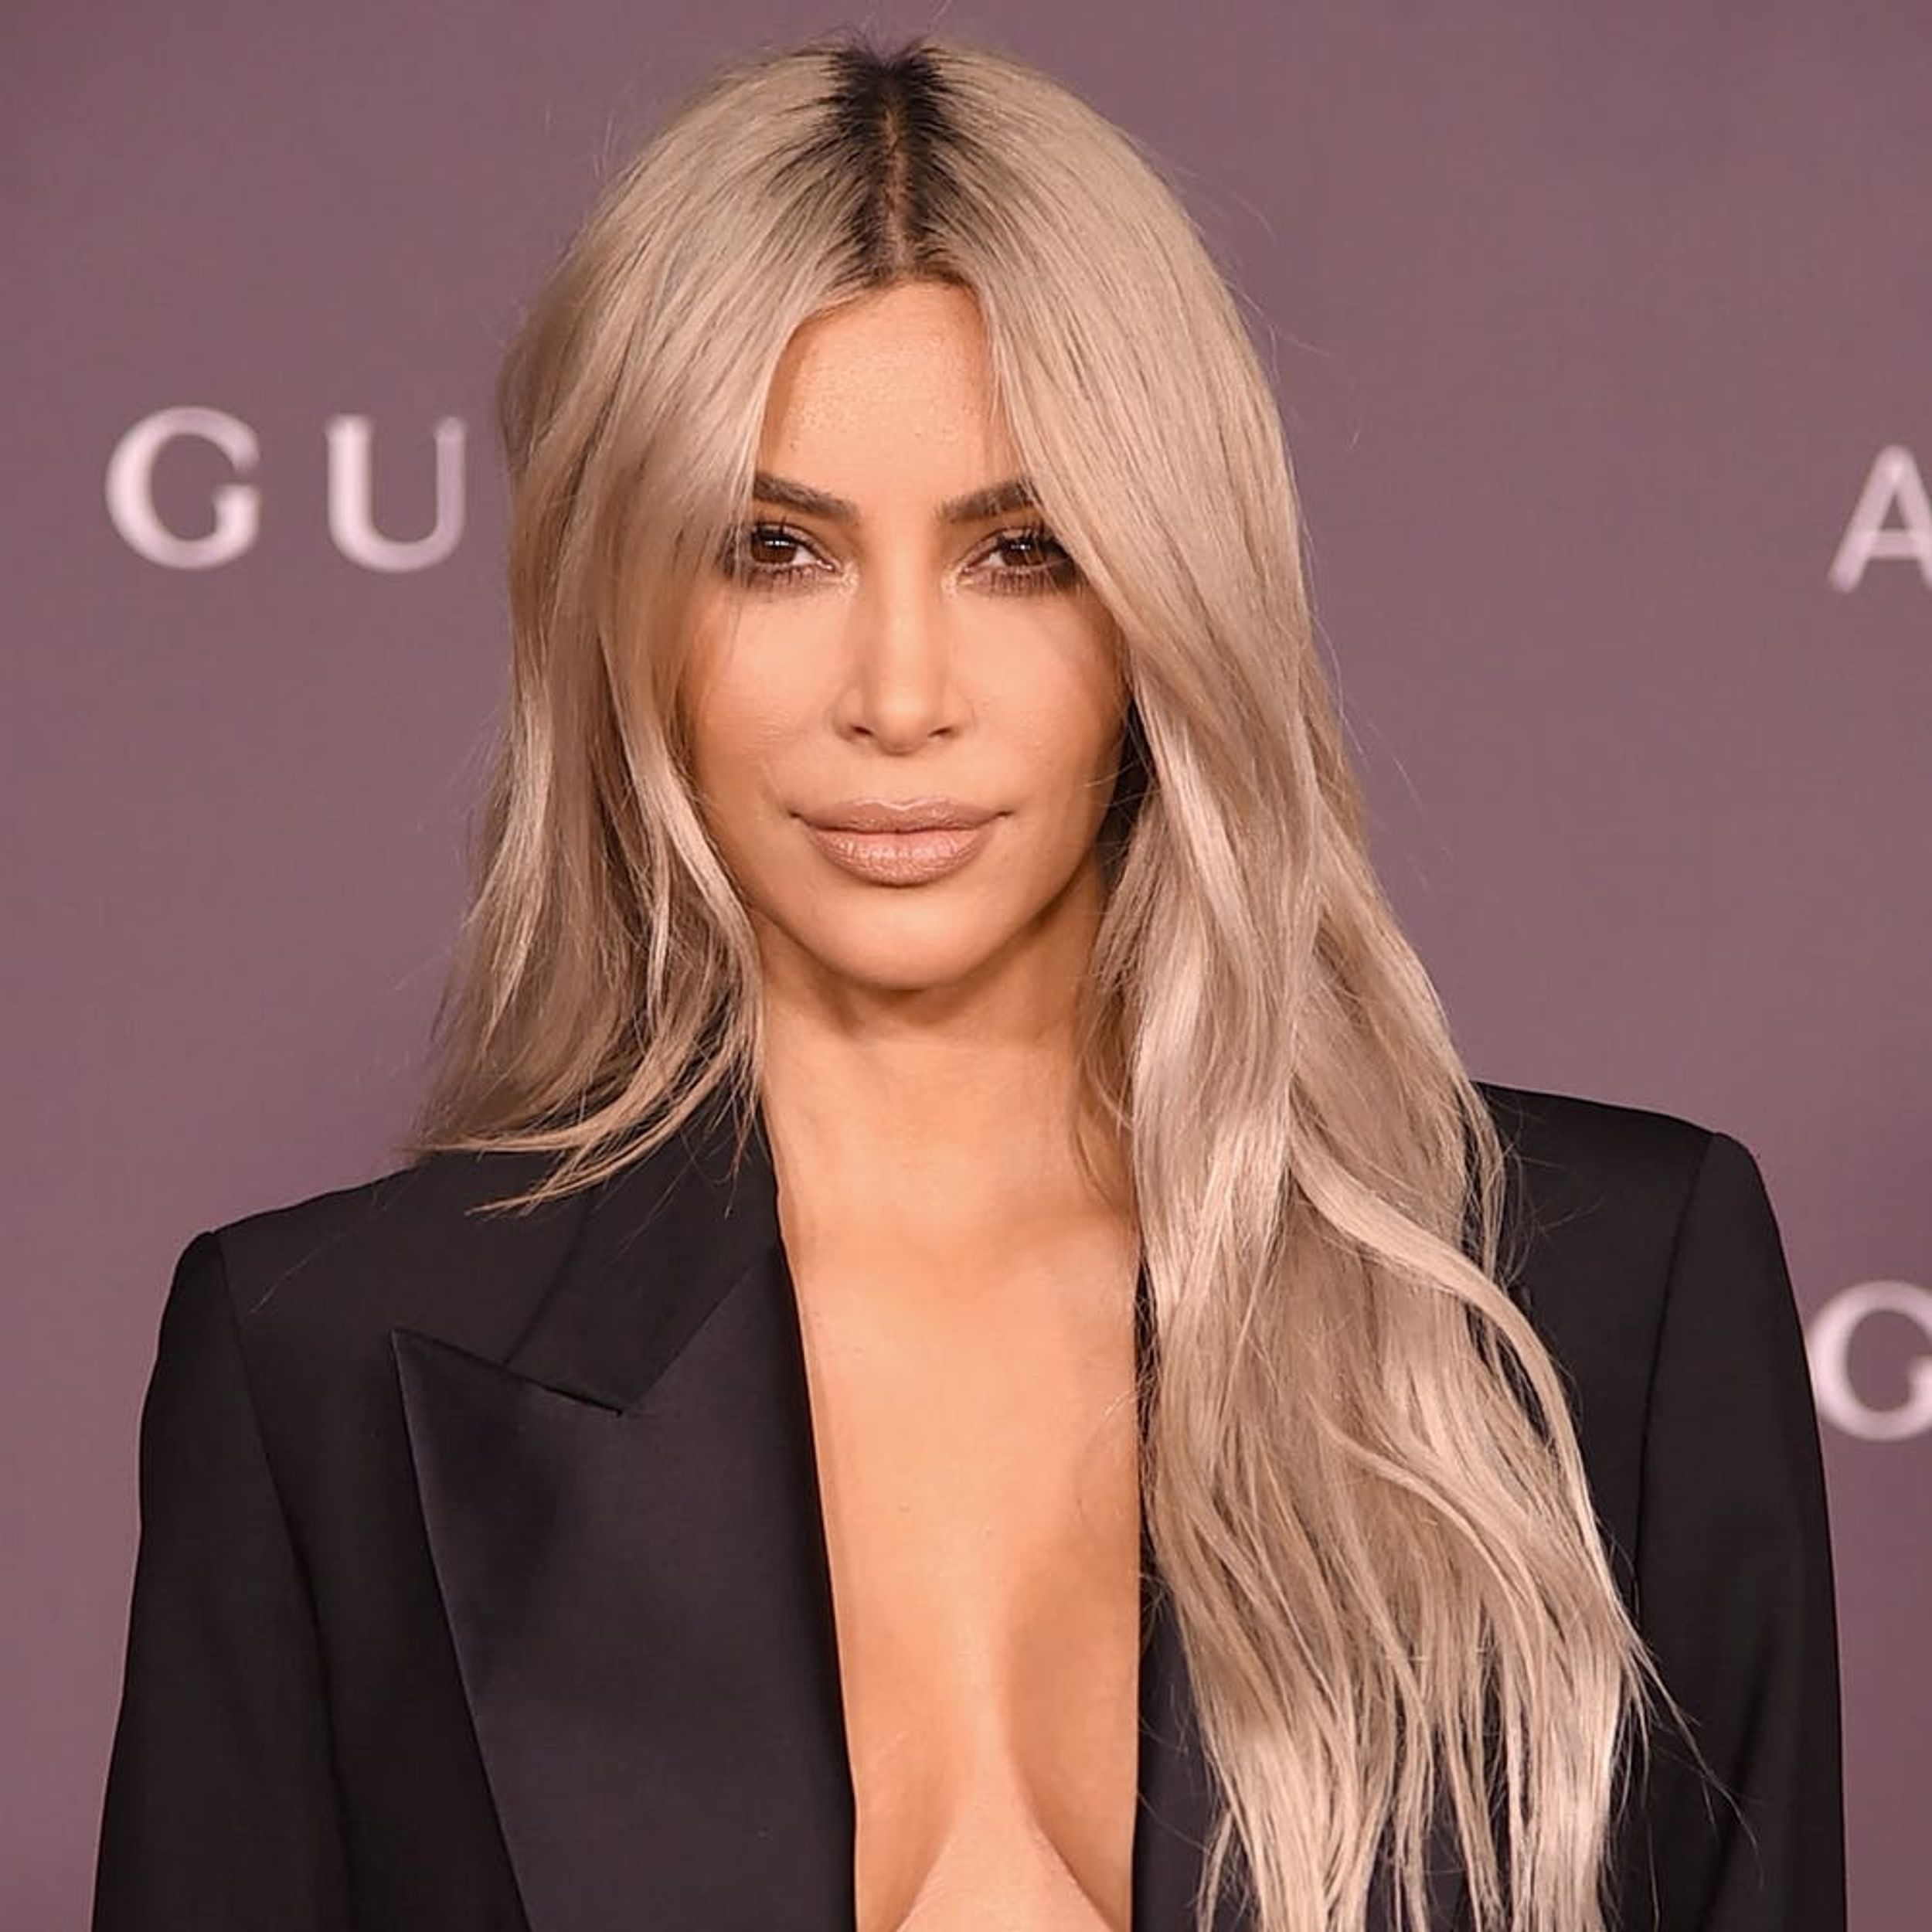 Kim Kardashian Gets Candid About Her Surrogacy Experience: “It Is So Much Harder”